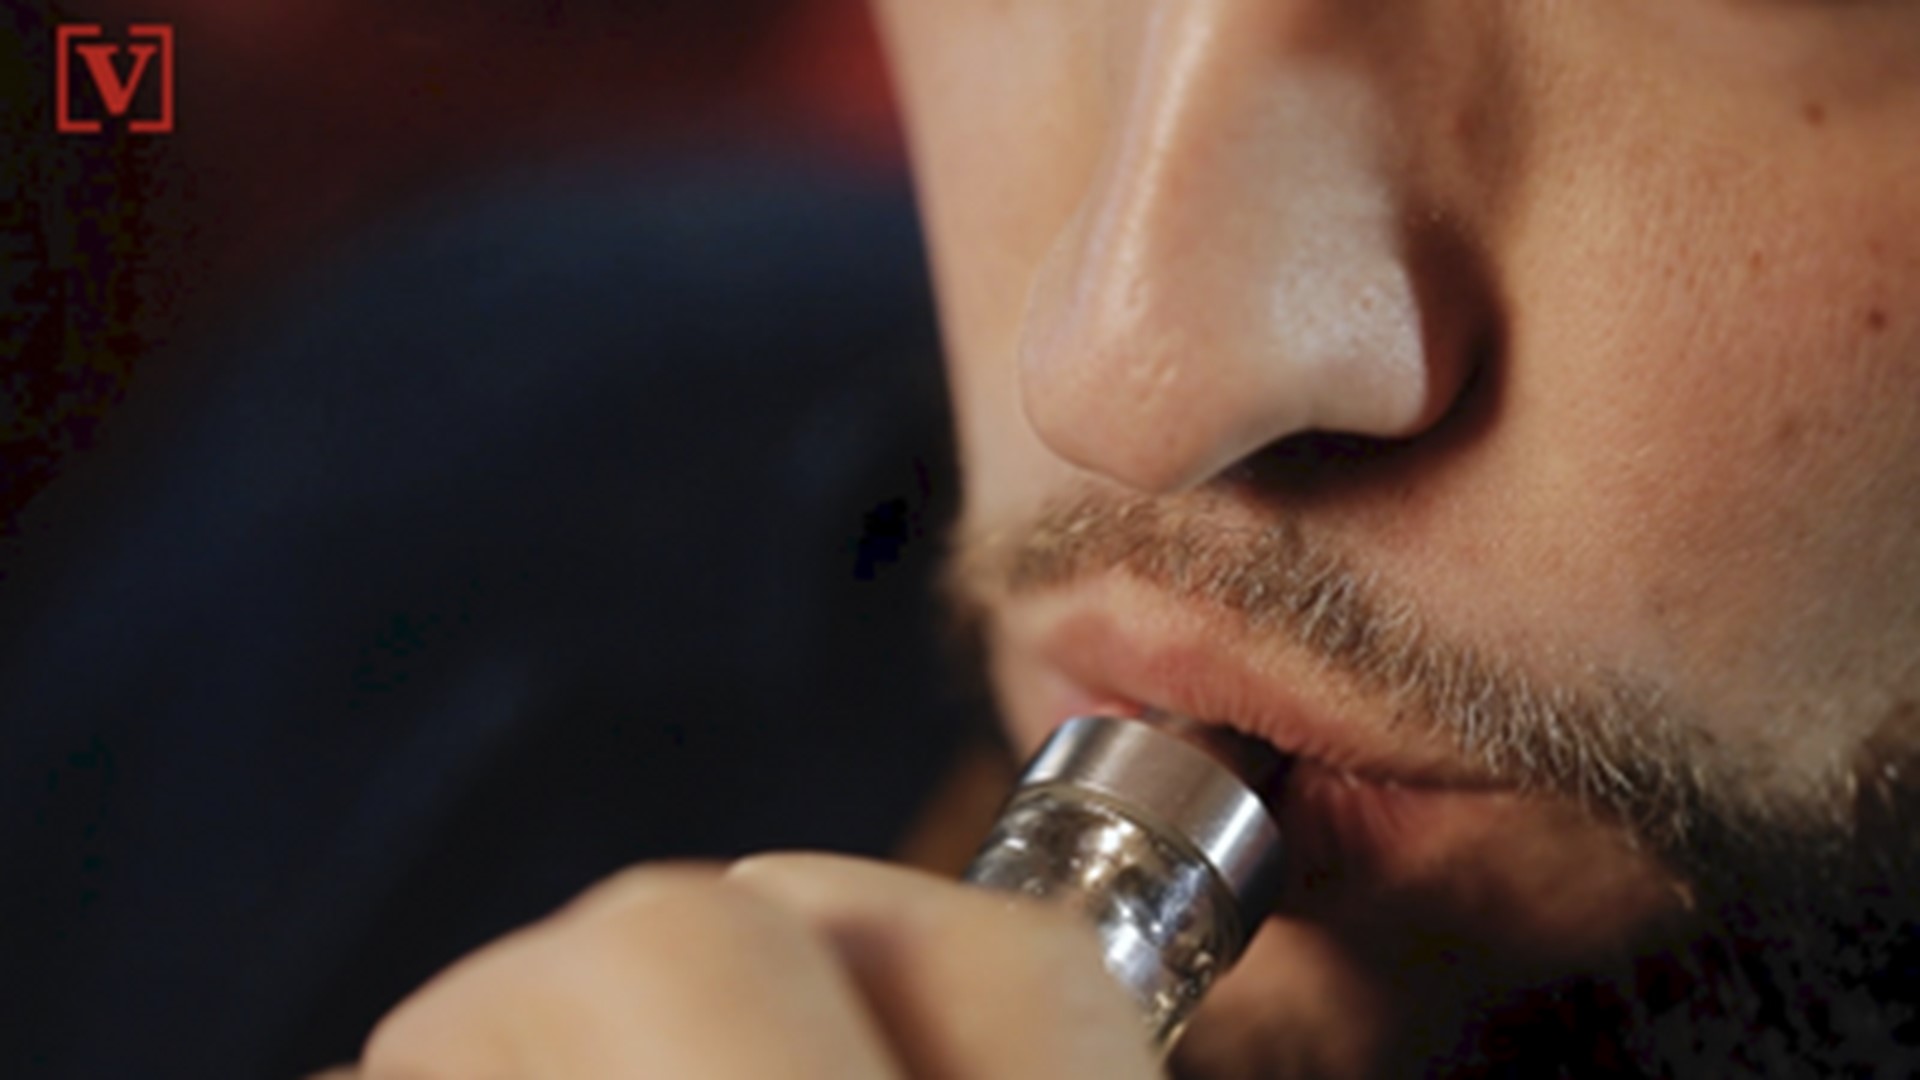 Federal health officials say they are investigating nearly 150 cases of severe pulmonary disease which may be the result of vaping. Veuer's Justin Kircher has more.